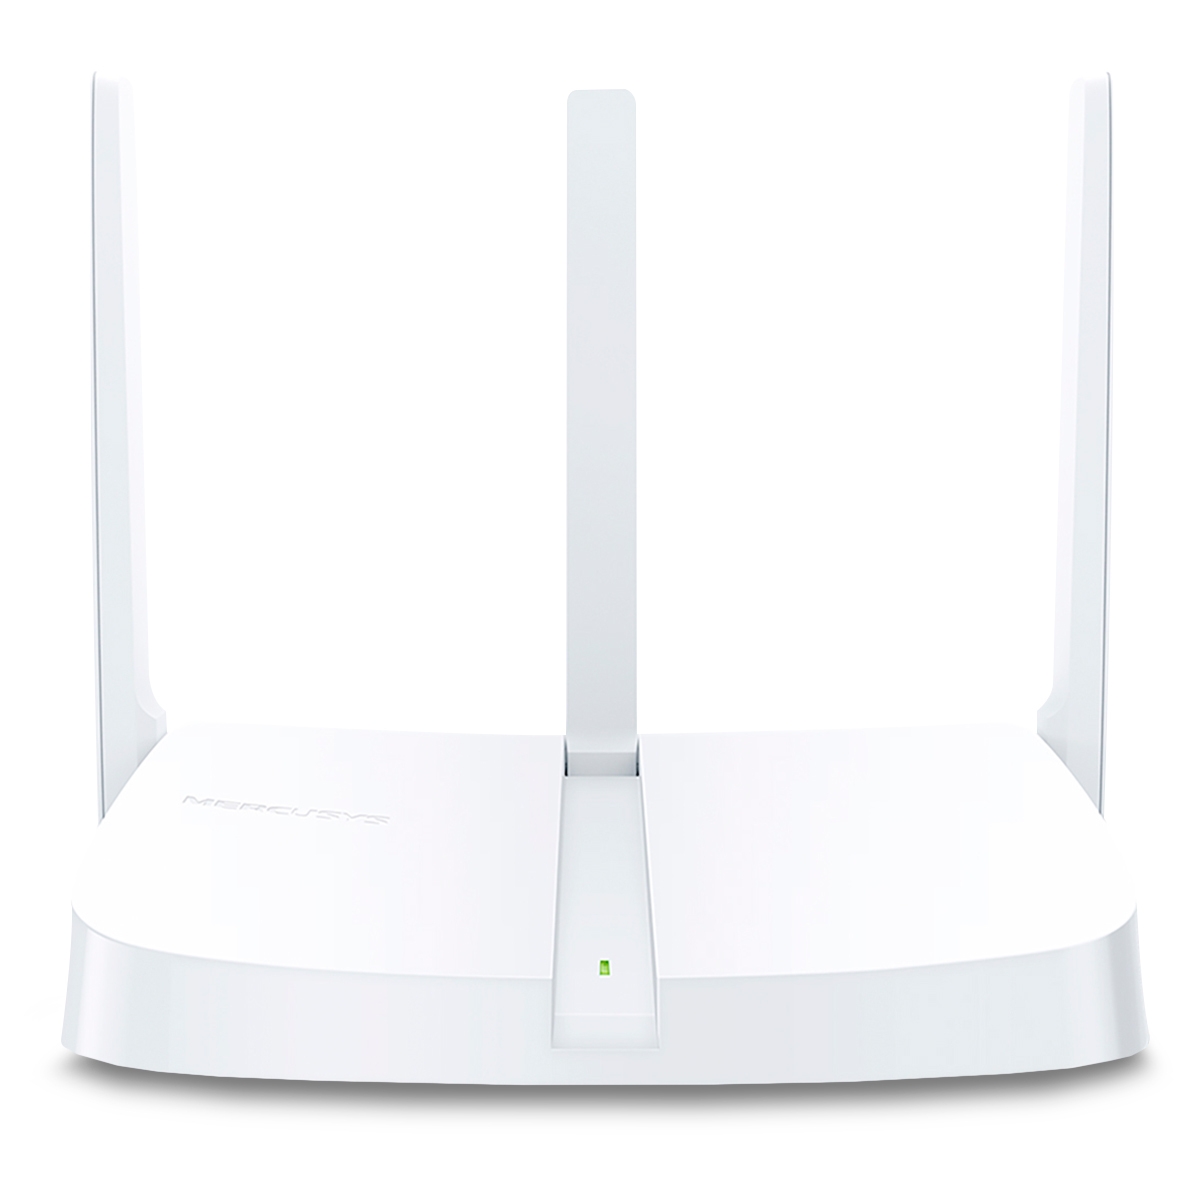 Router Inalámbrico Mercusys MW306R / 4 Fast Ethernet / 3 antenas / 300Mbps